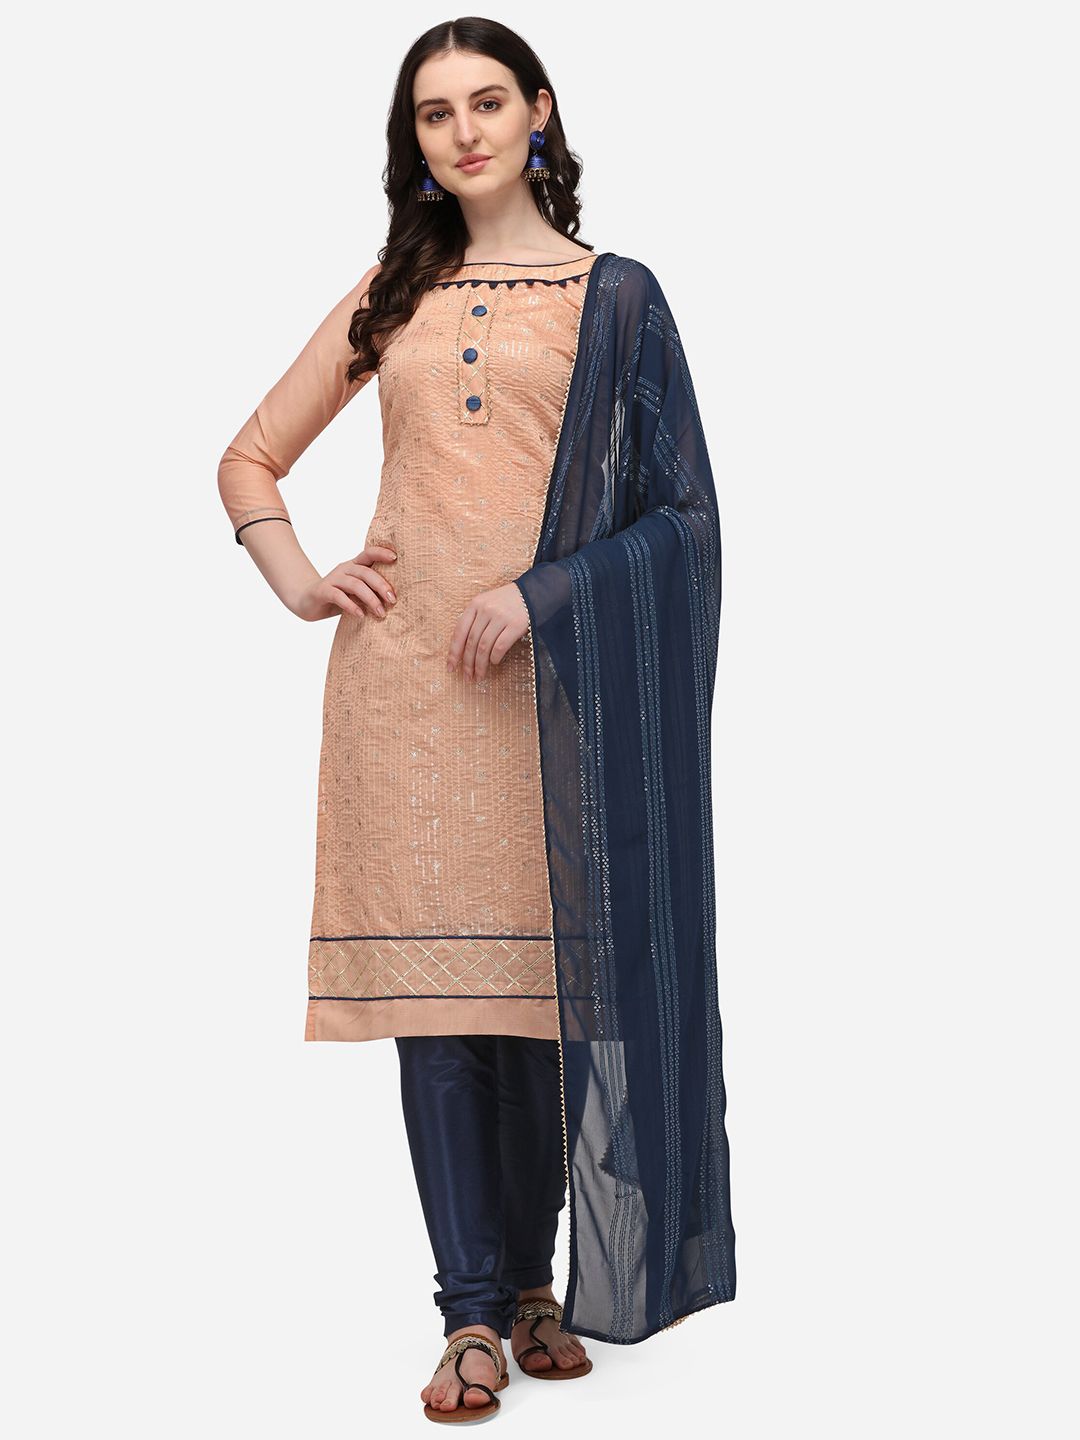 Mitera Peach-Coloured & Navy Blue Embroidered Unstitched Dress Material Price in India